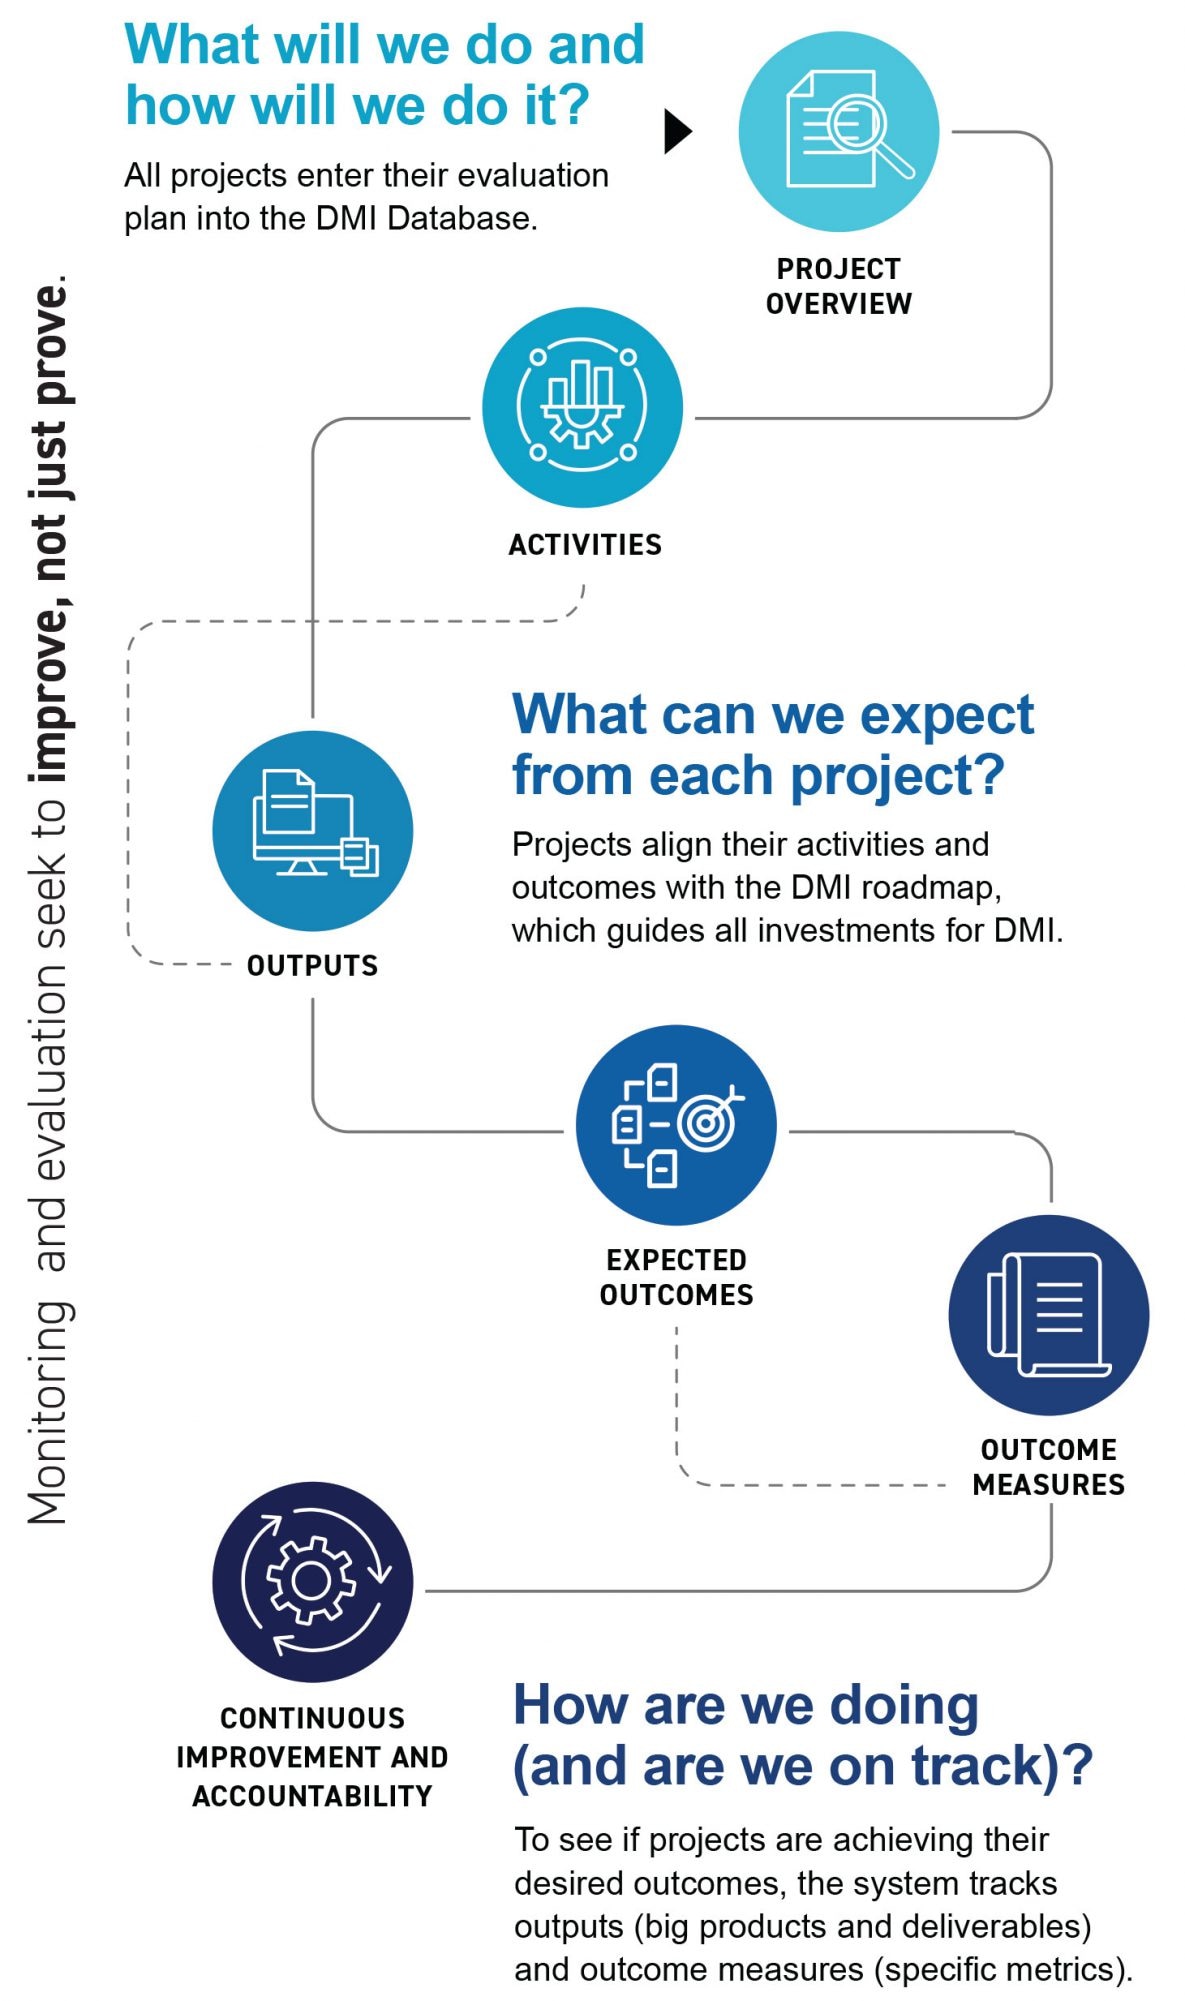 What will we do and how will we do it? Project Overview; Activities; Outputs: What can we expect from each project? Expected Outcomes; Outcome Measures; Continuous Improvement and Accountability: How are we doing (and are we on track)?